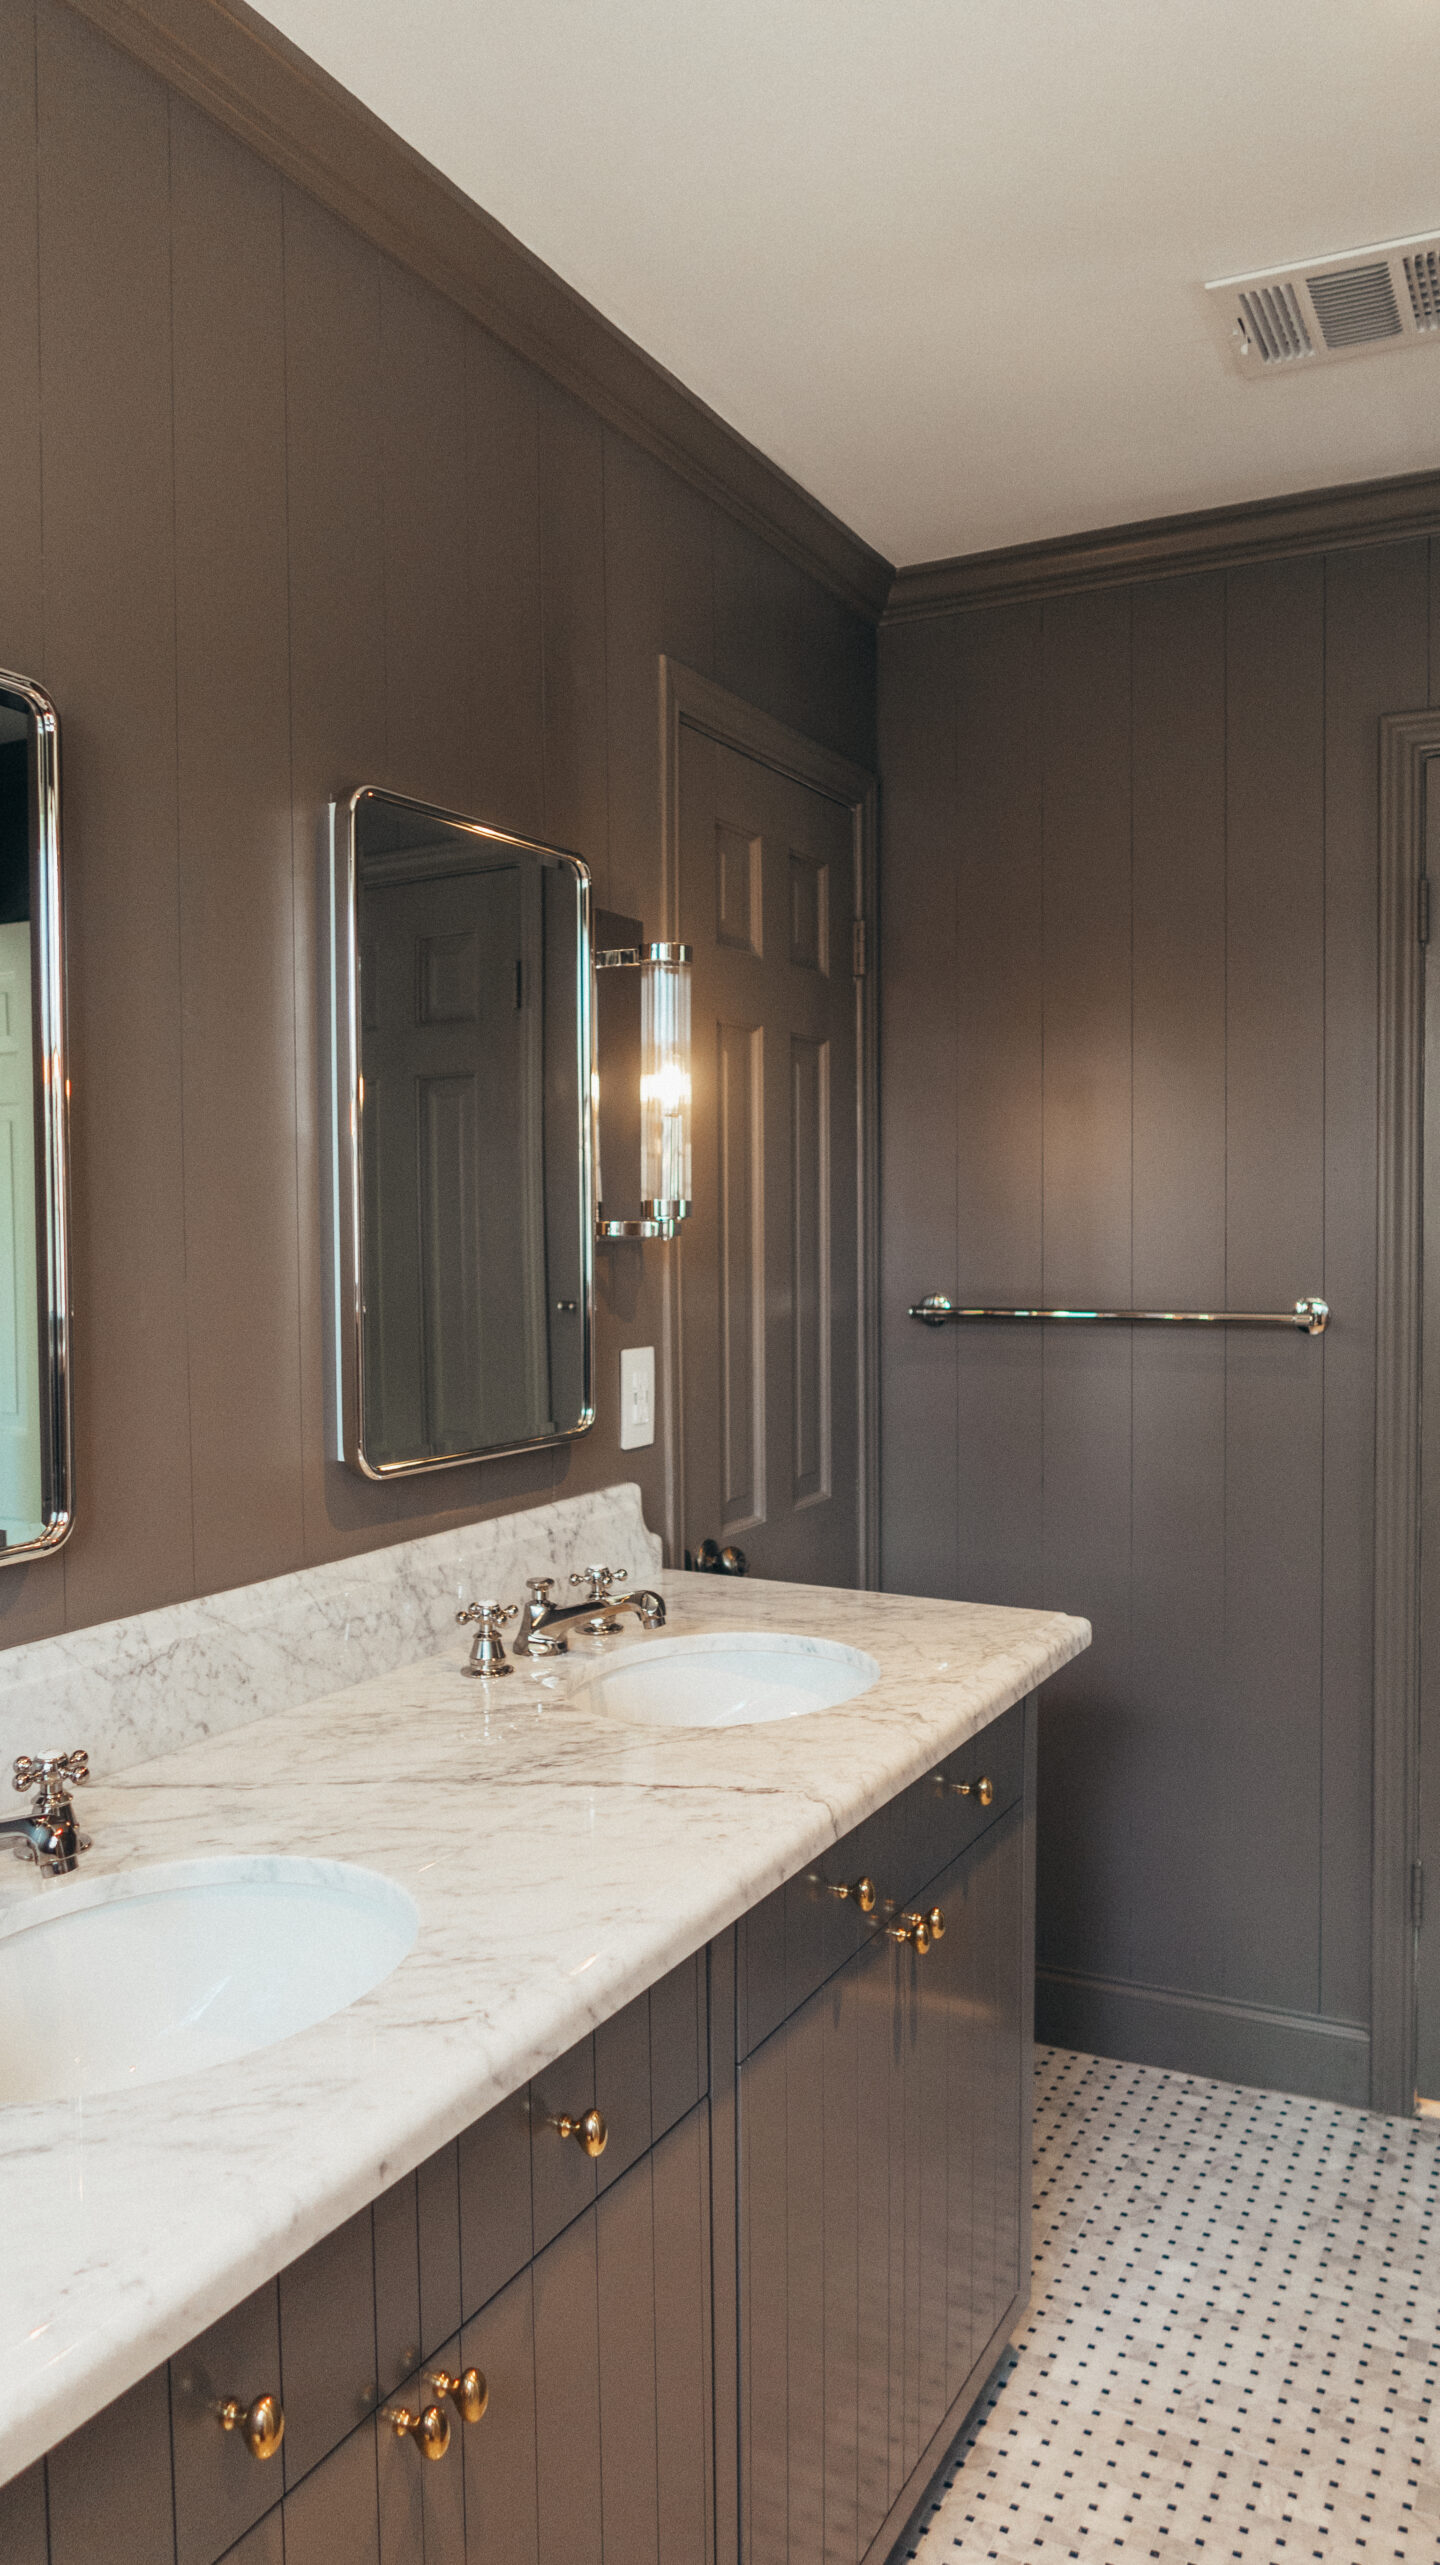 timeless bathroom, cottage core, brown bathroom, bathroom remodel ideas, Sophisticated bathroom retreat with timeless finishes and lighting, interior designer houston, interior design